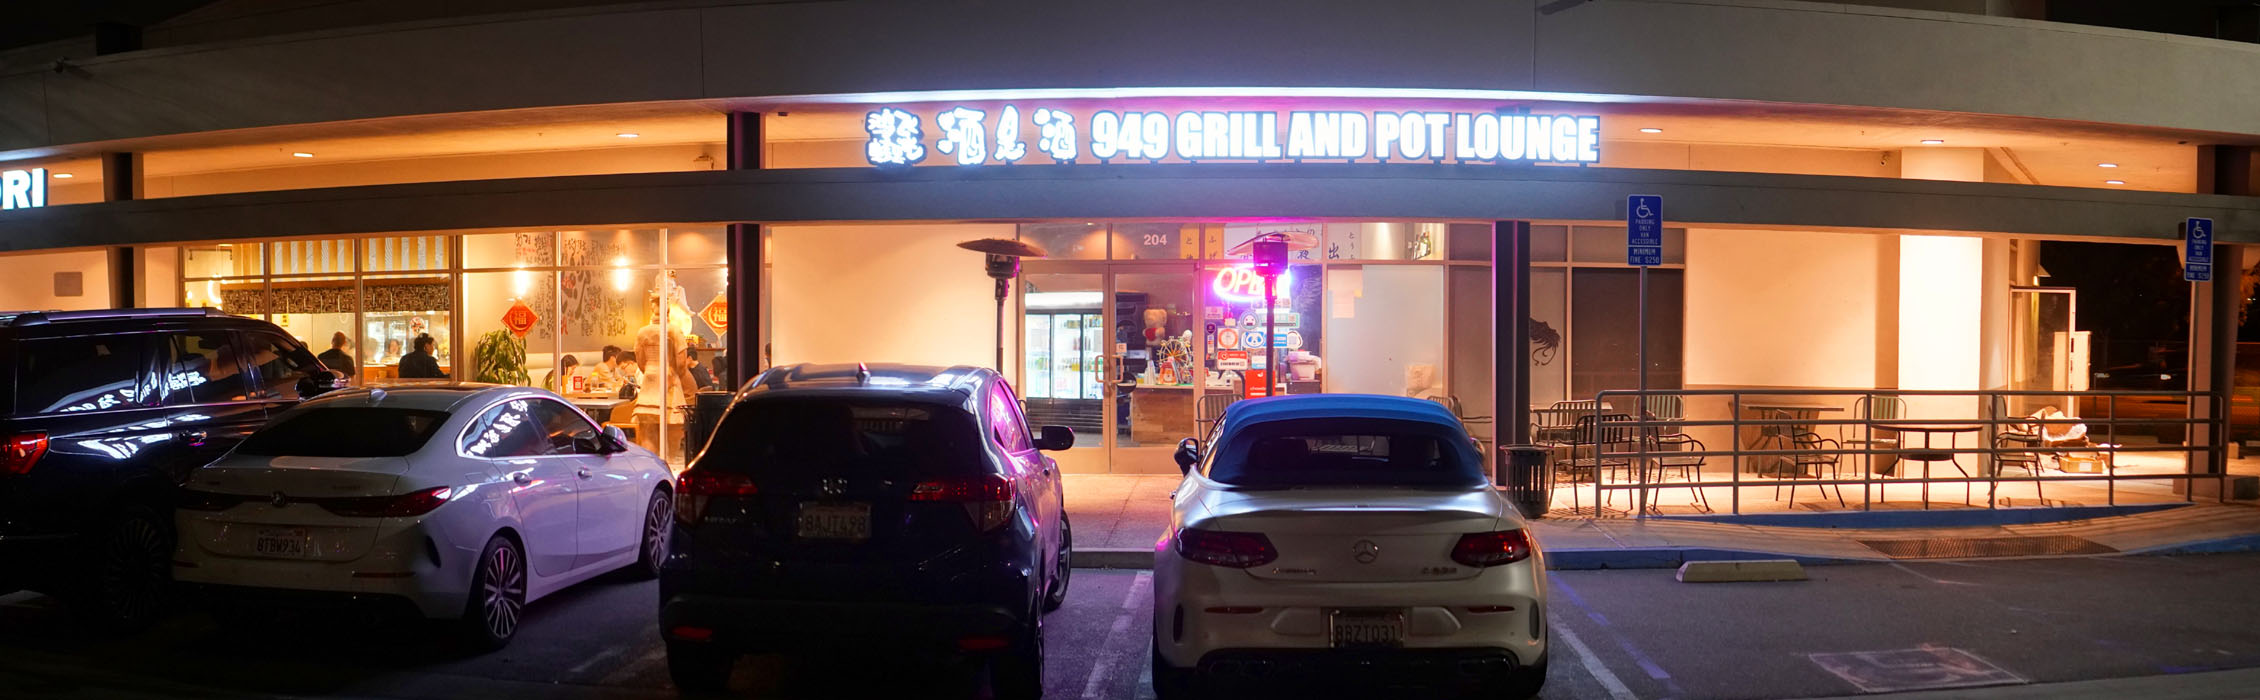 949 Grill and Pot Lounge Exterior